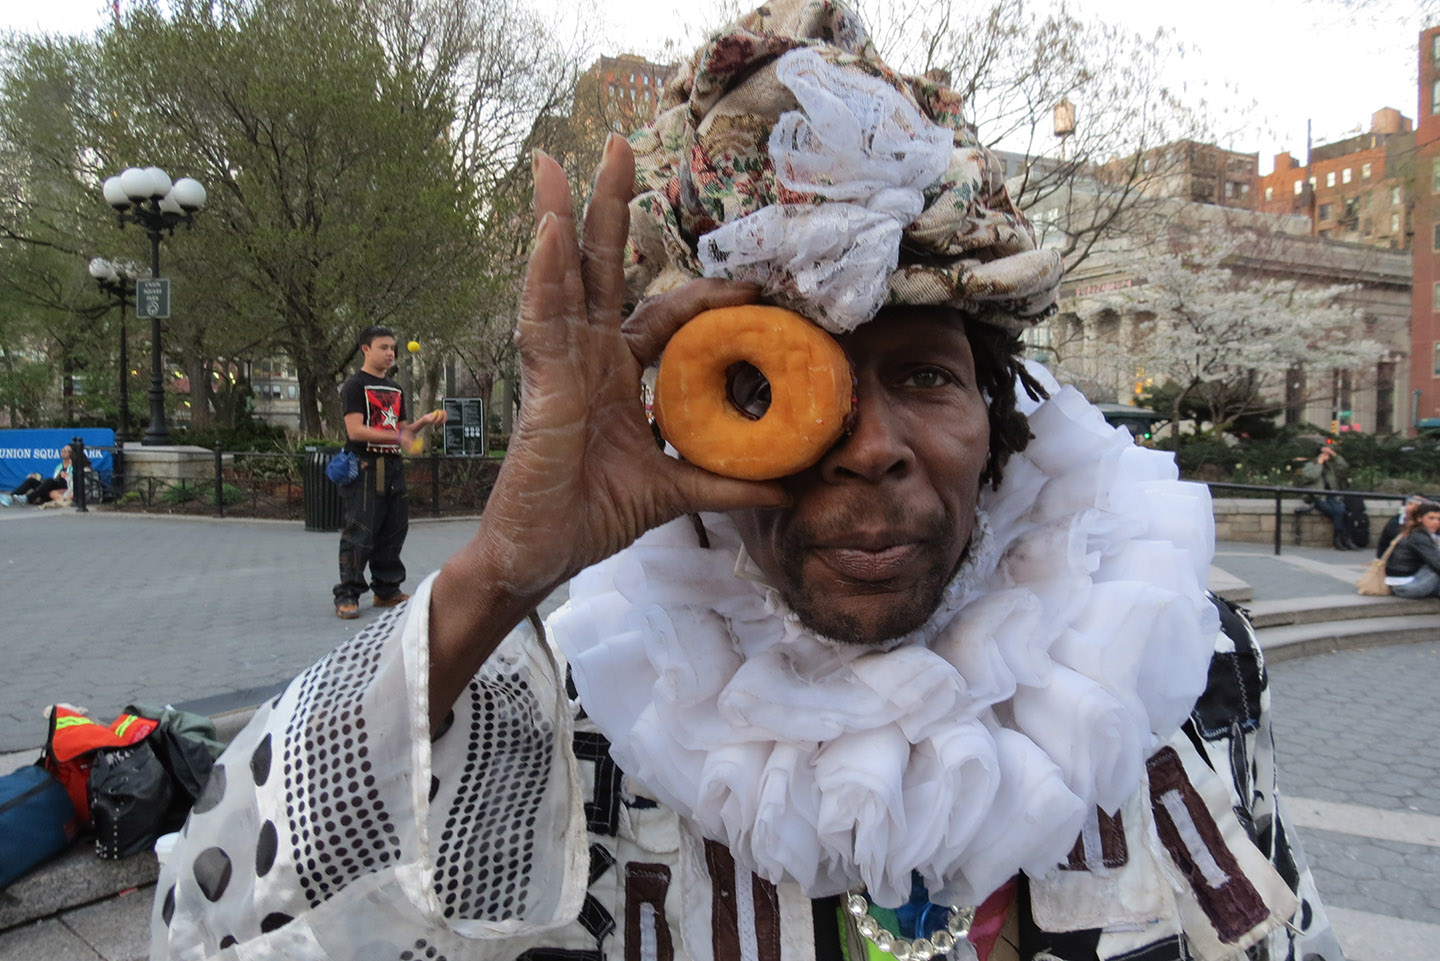 Wendell with a donut